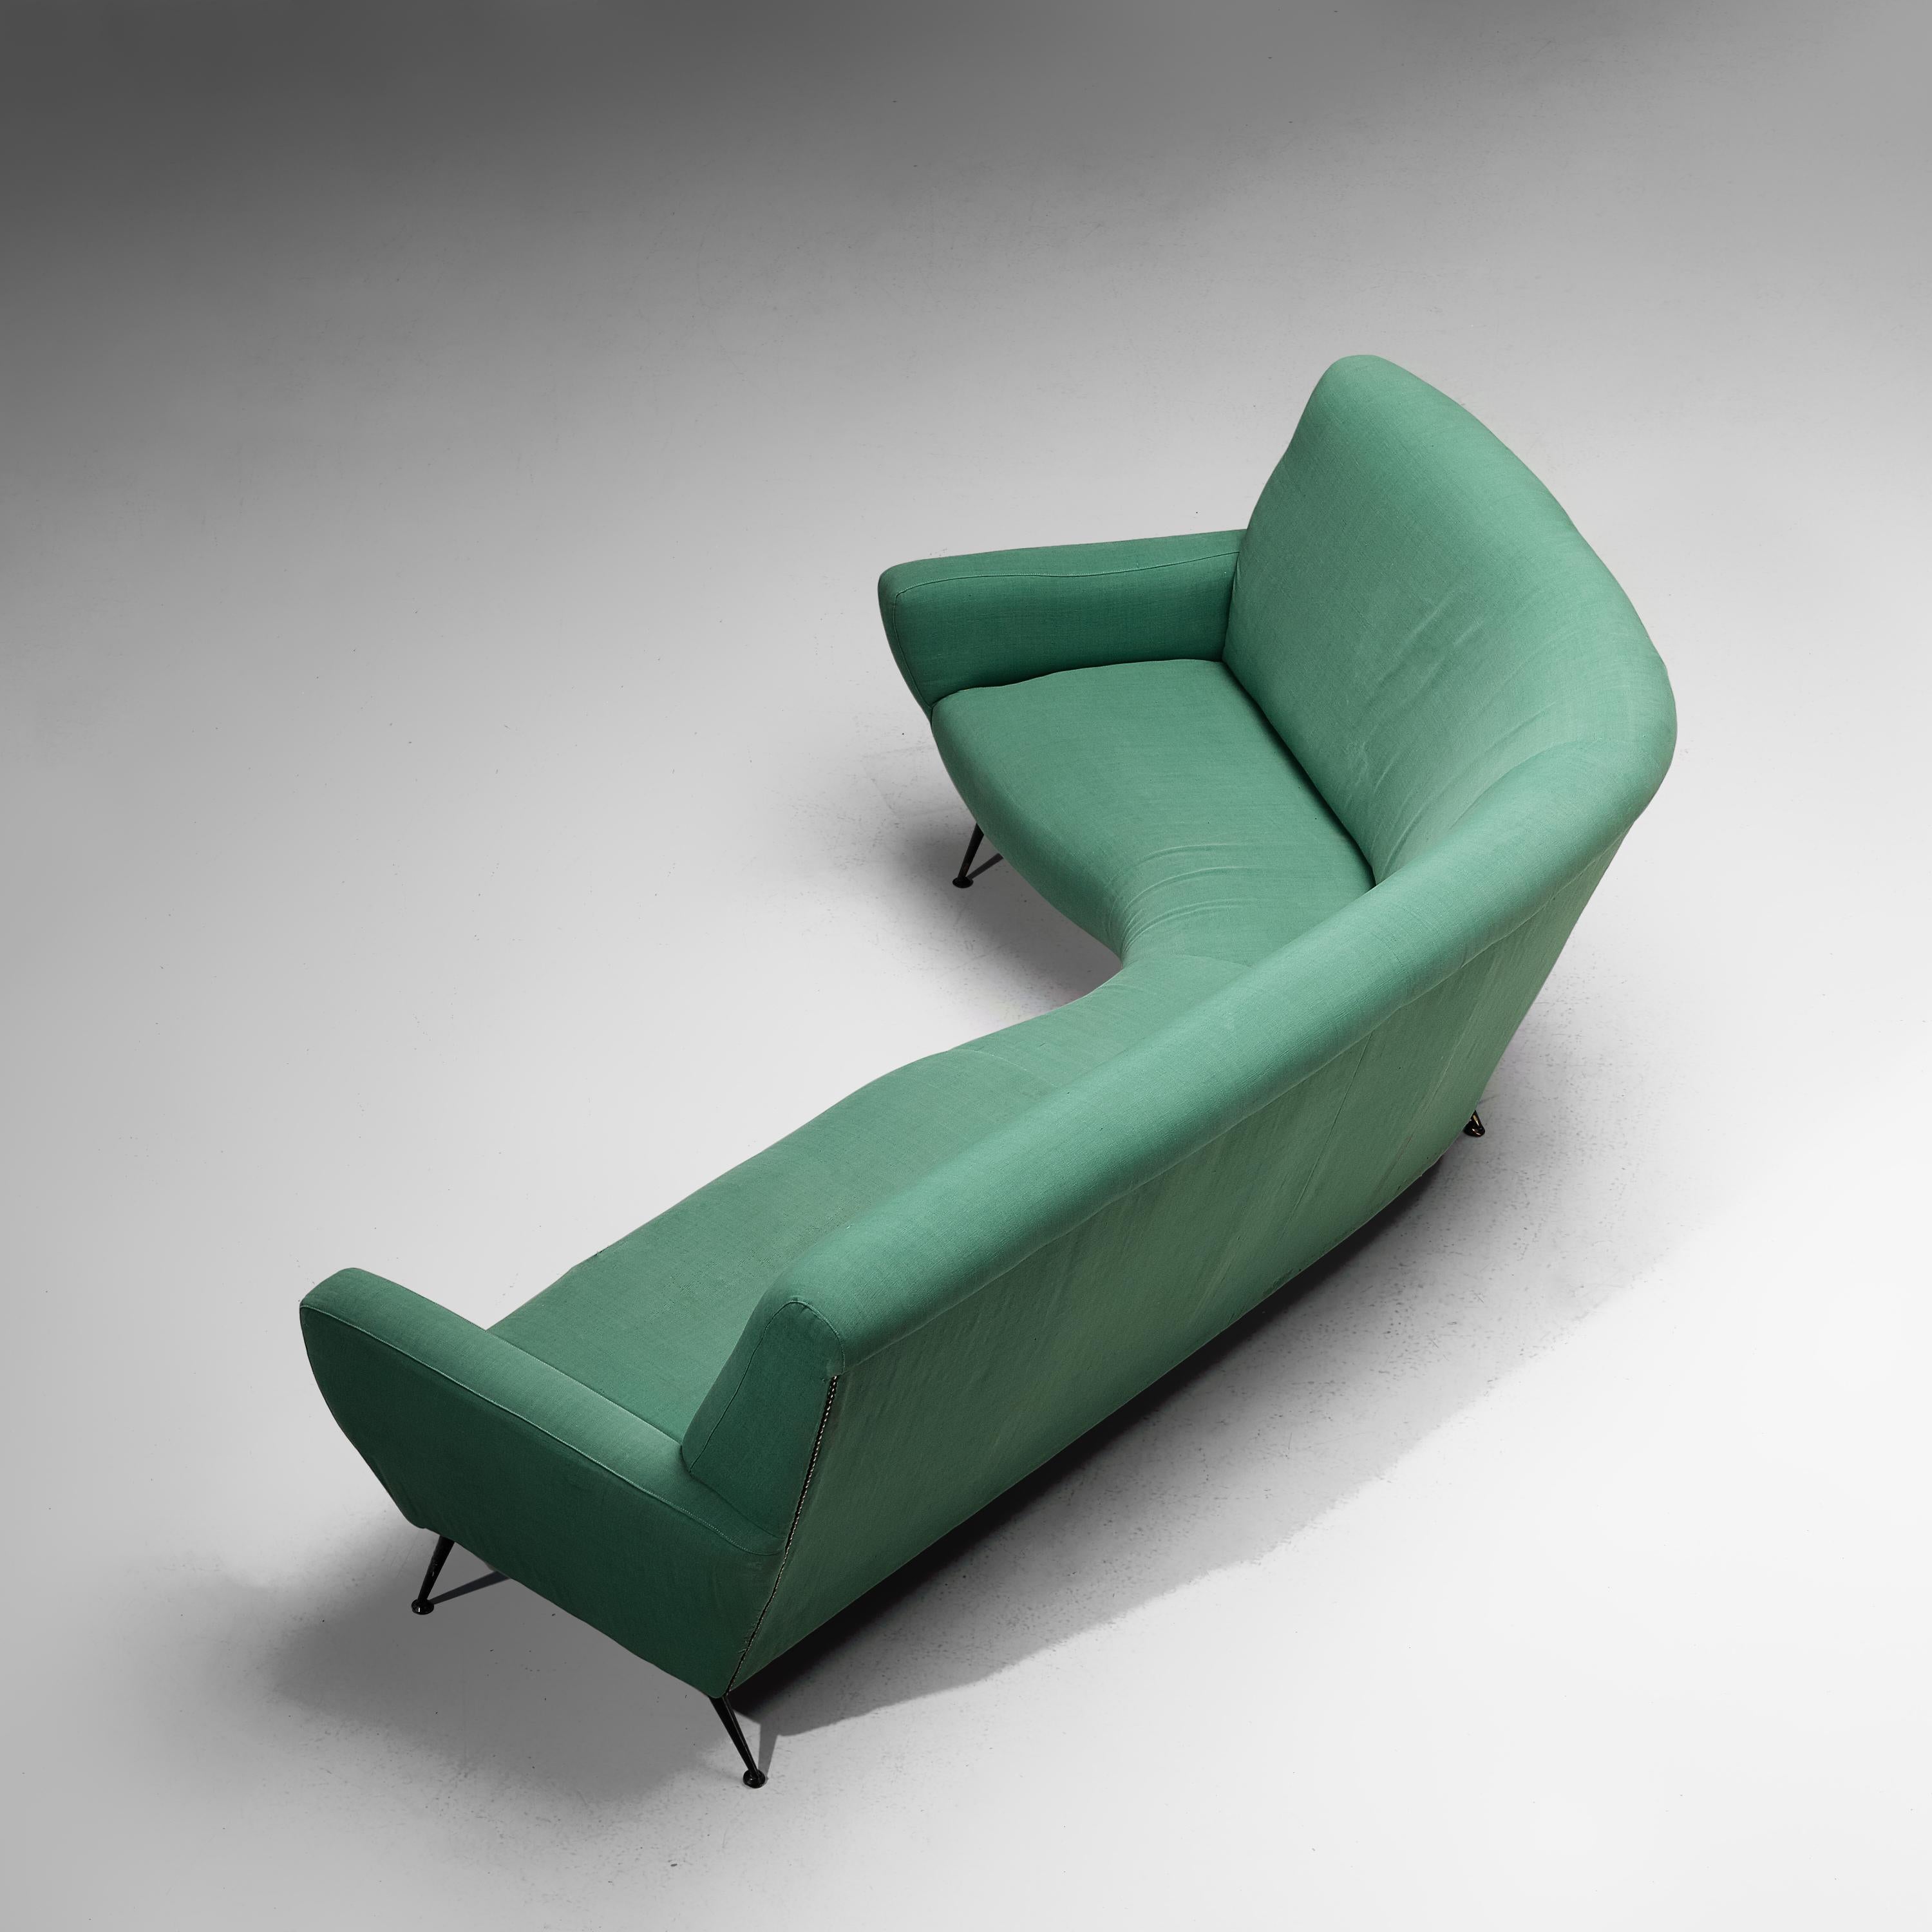 Lacquered Gigi Radice for Minotti Curved Sofa in Green Upholstery